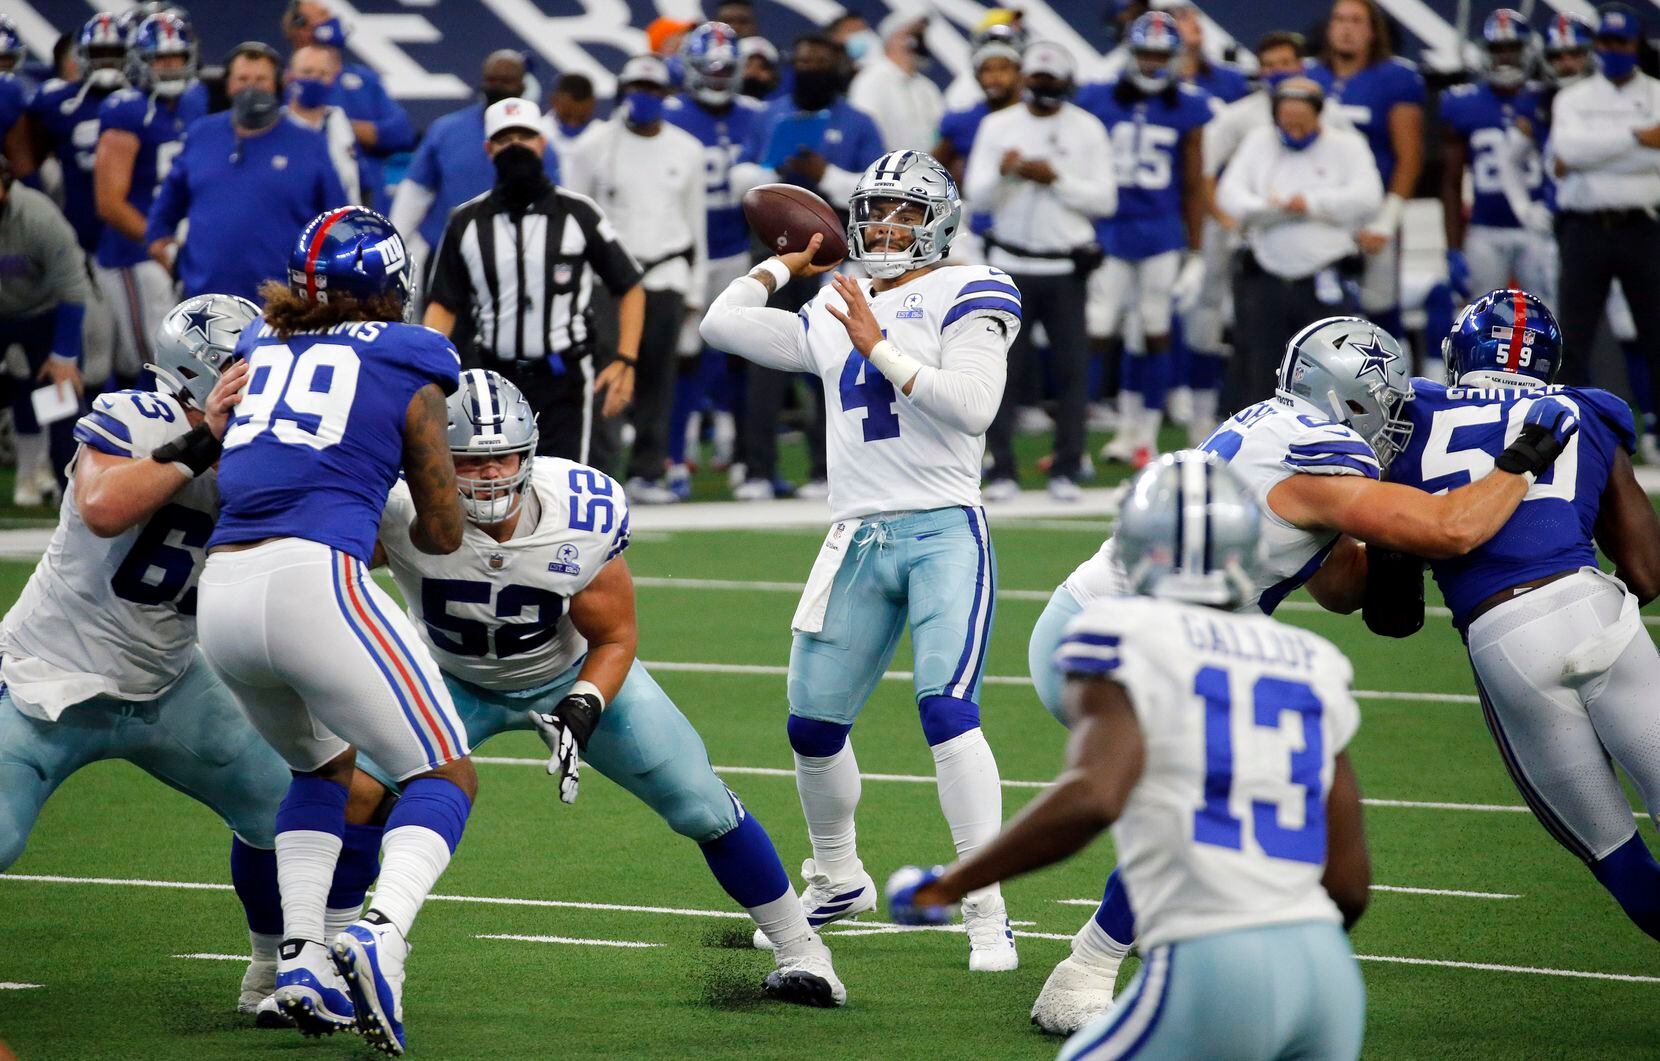 Dallas Cowboys quarterback Dak Prescott (4) throws a pass towards the end zone during the first quarter against the New York Giants at AT&T Stadium Stadium in Arlington, Texas, Sunday, October 11, 2020. (Tom Fox/The Dallas Morning News)